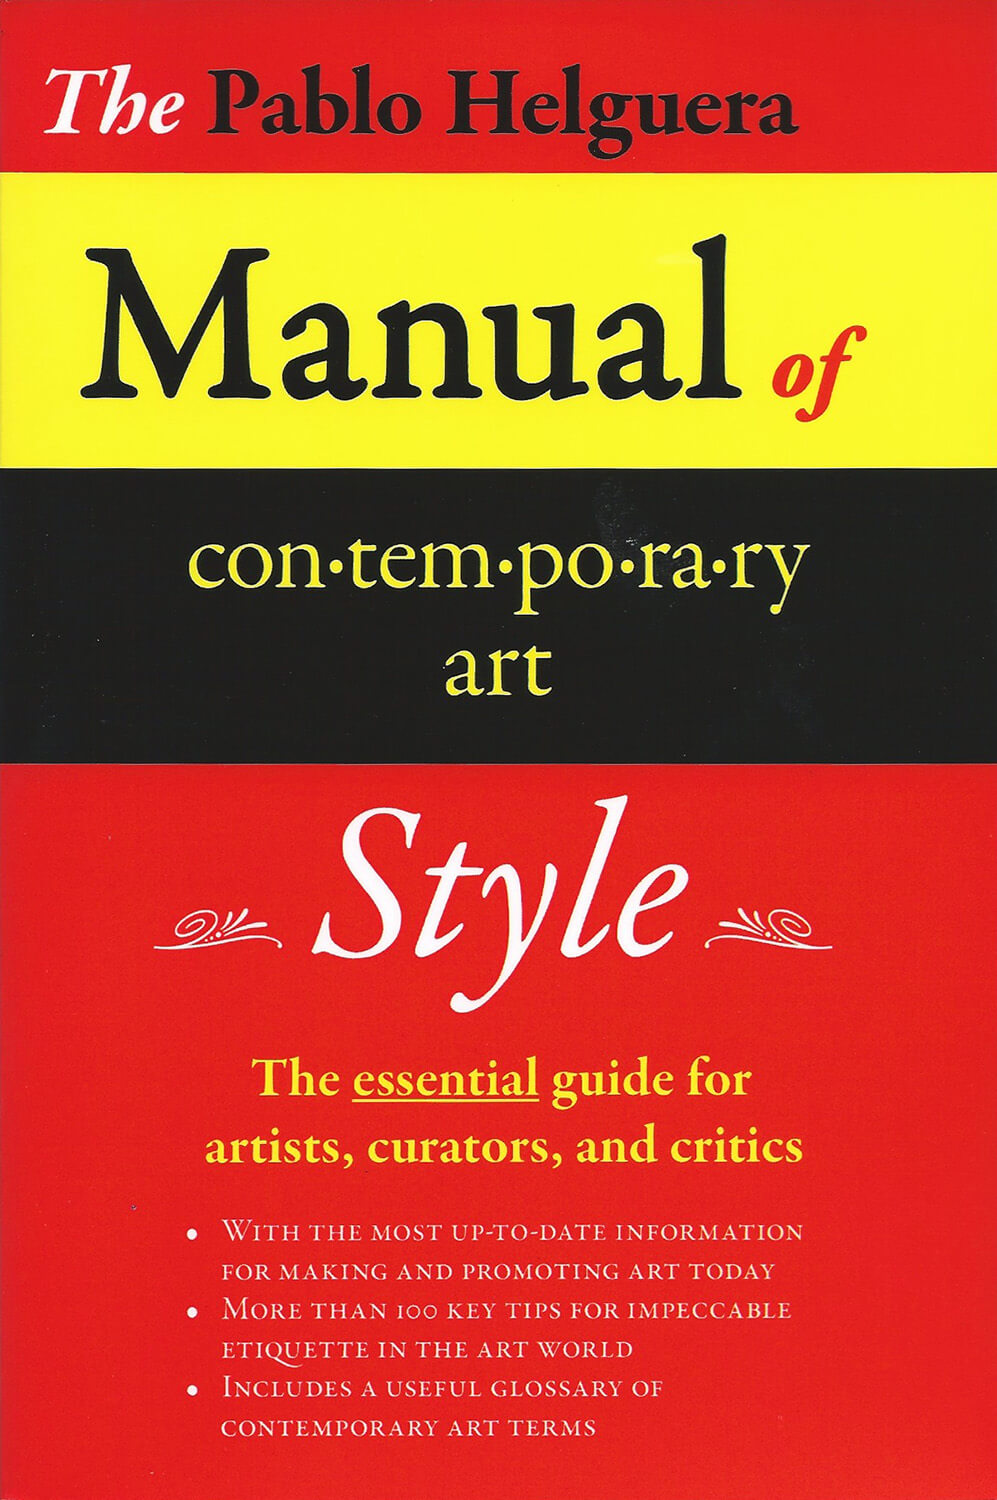 Cover of Pablo Helguera’s The Pablo Helguera Manual of Contemporary Art Style (Jorge Pinto Books, 2007). ISBN:0-9790766-0-9